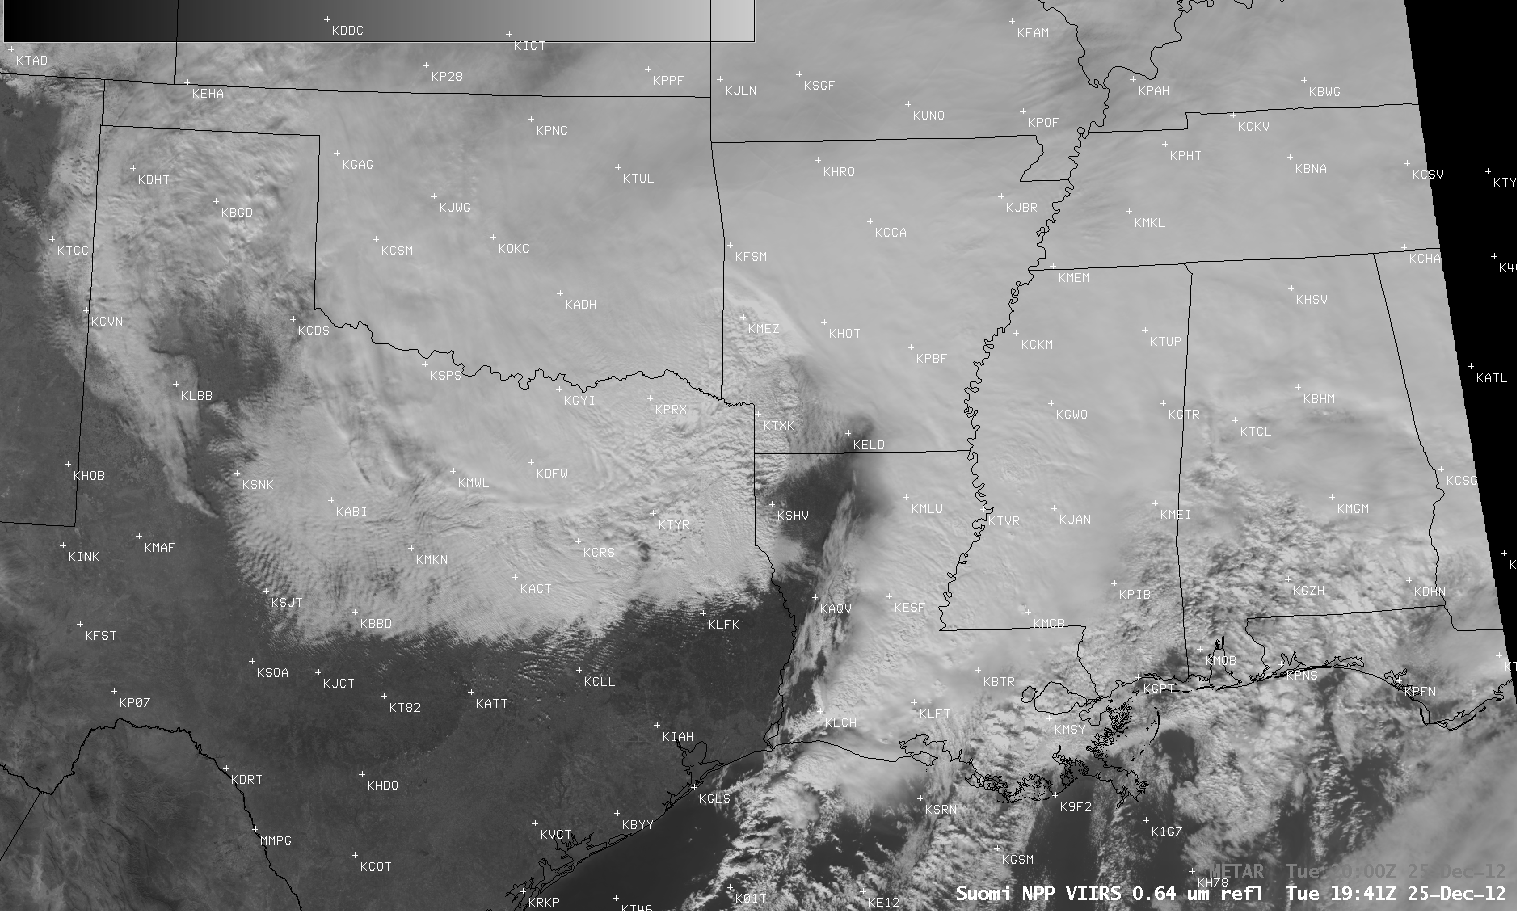 Suomi NPP VIIRS 0.64 Âµm visible and 11.45 Âµm IR channel images